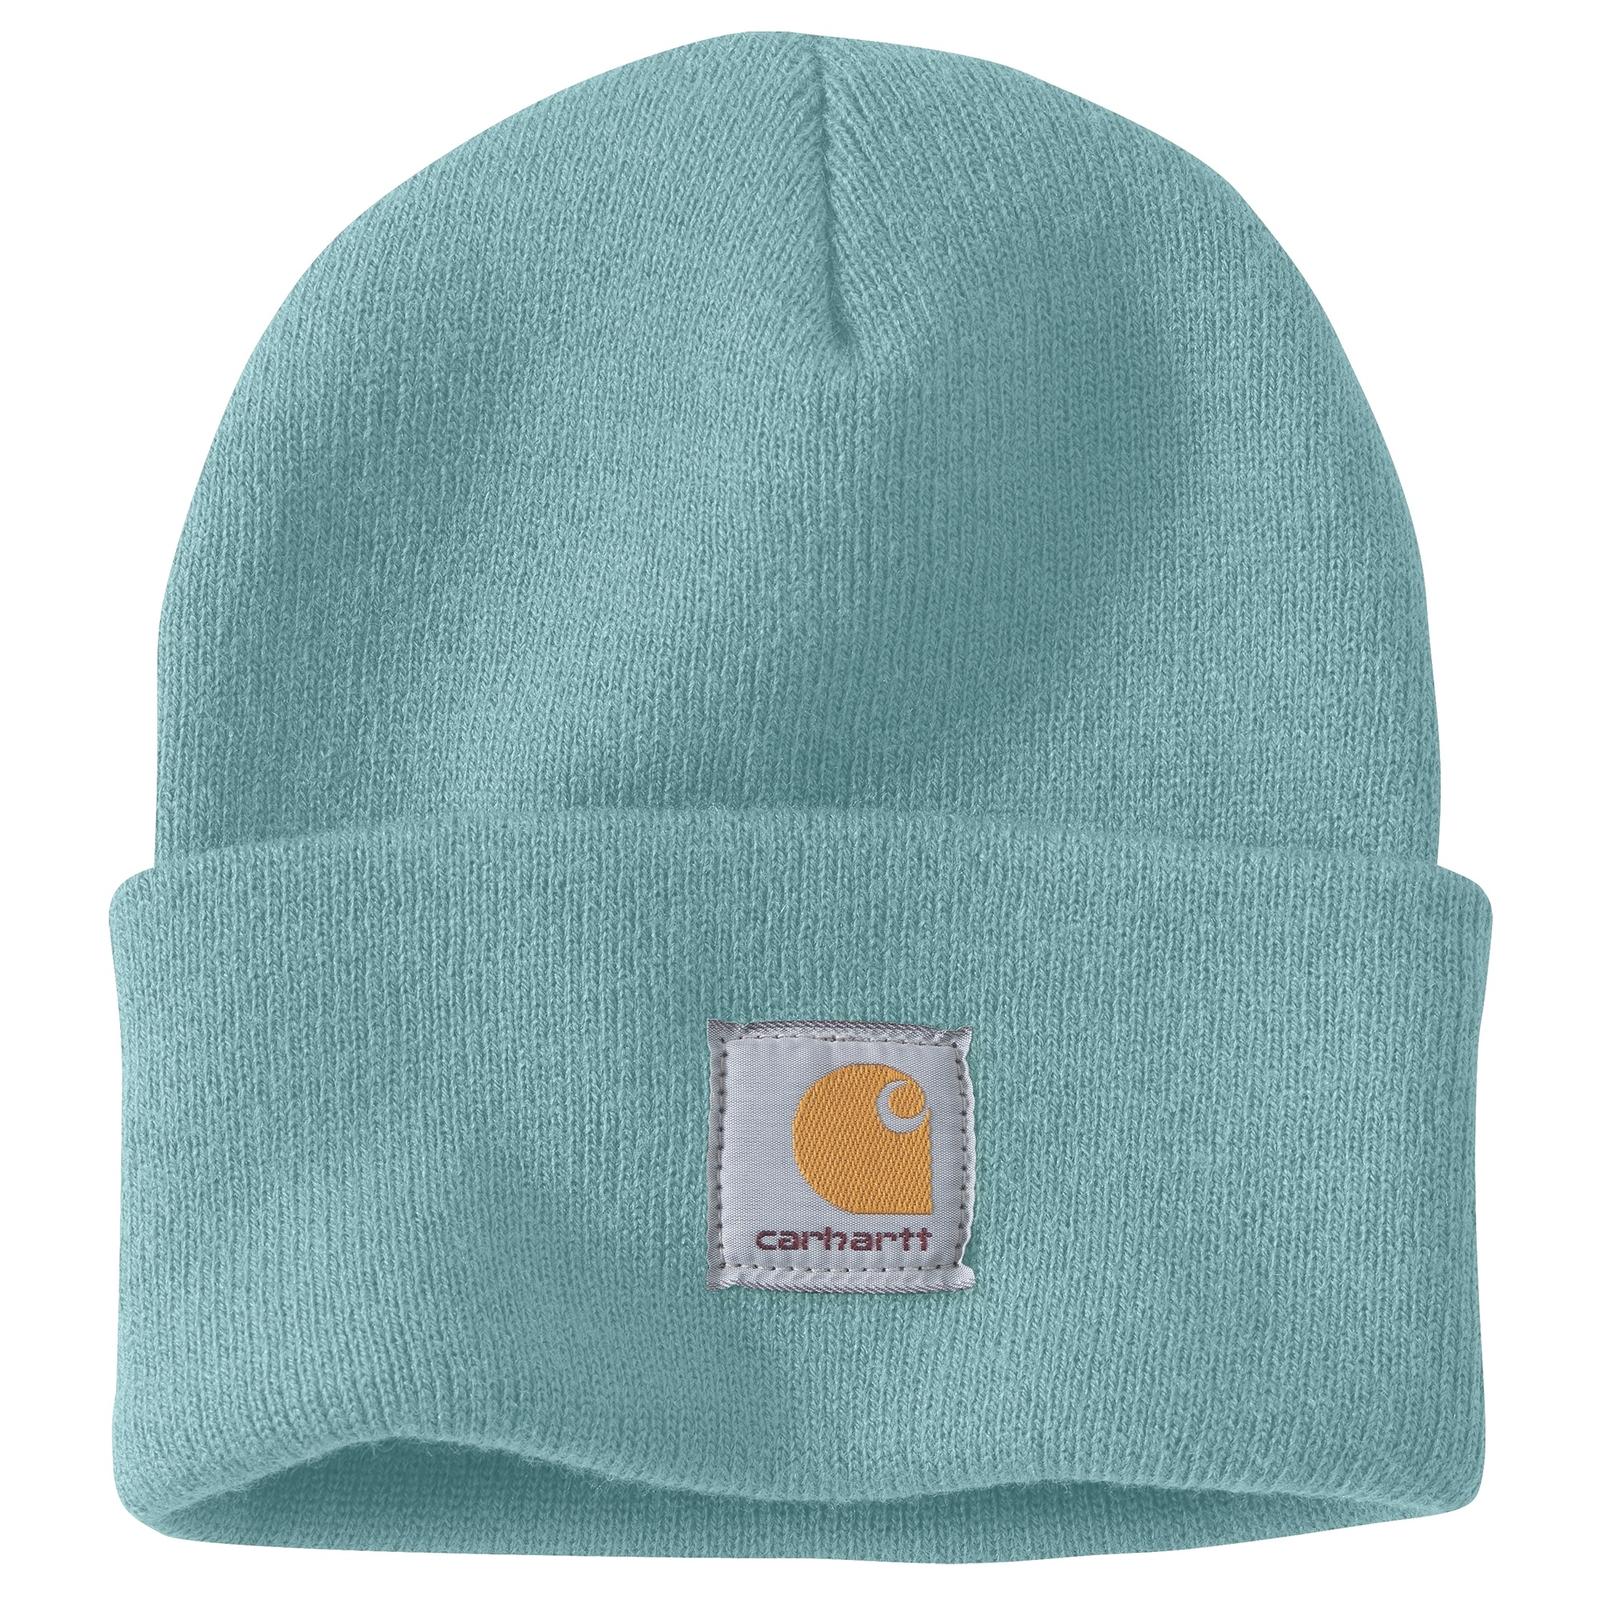 Carhartt Acrylic Watch Hat in Turquoise 